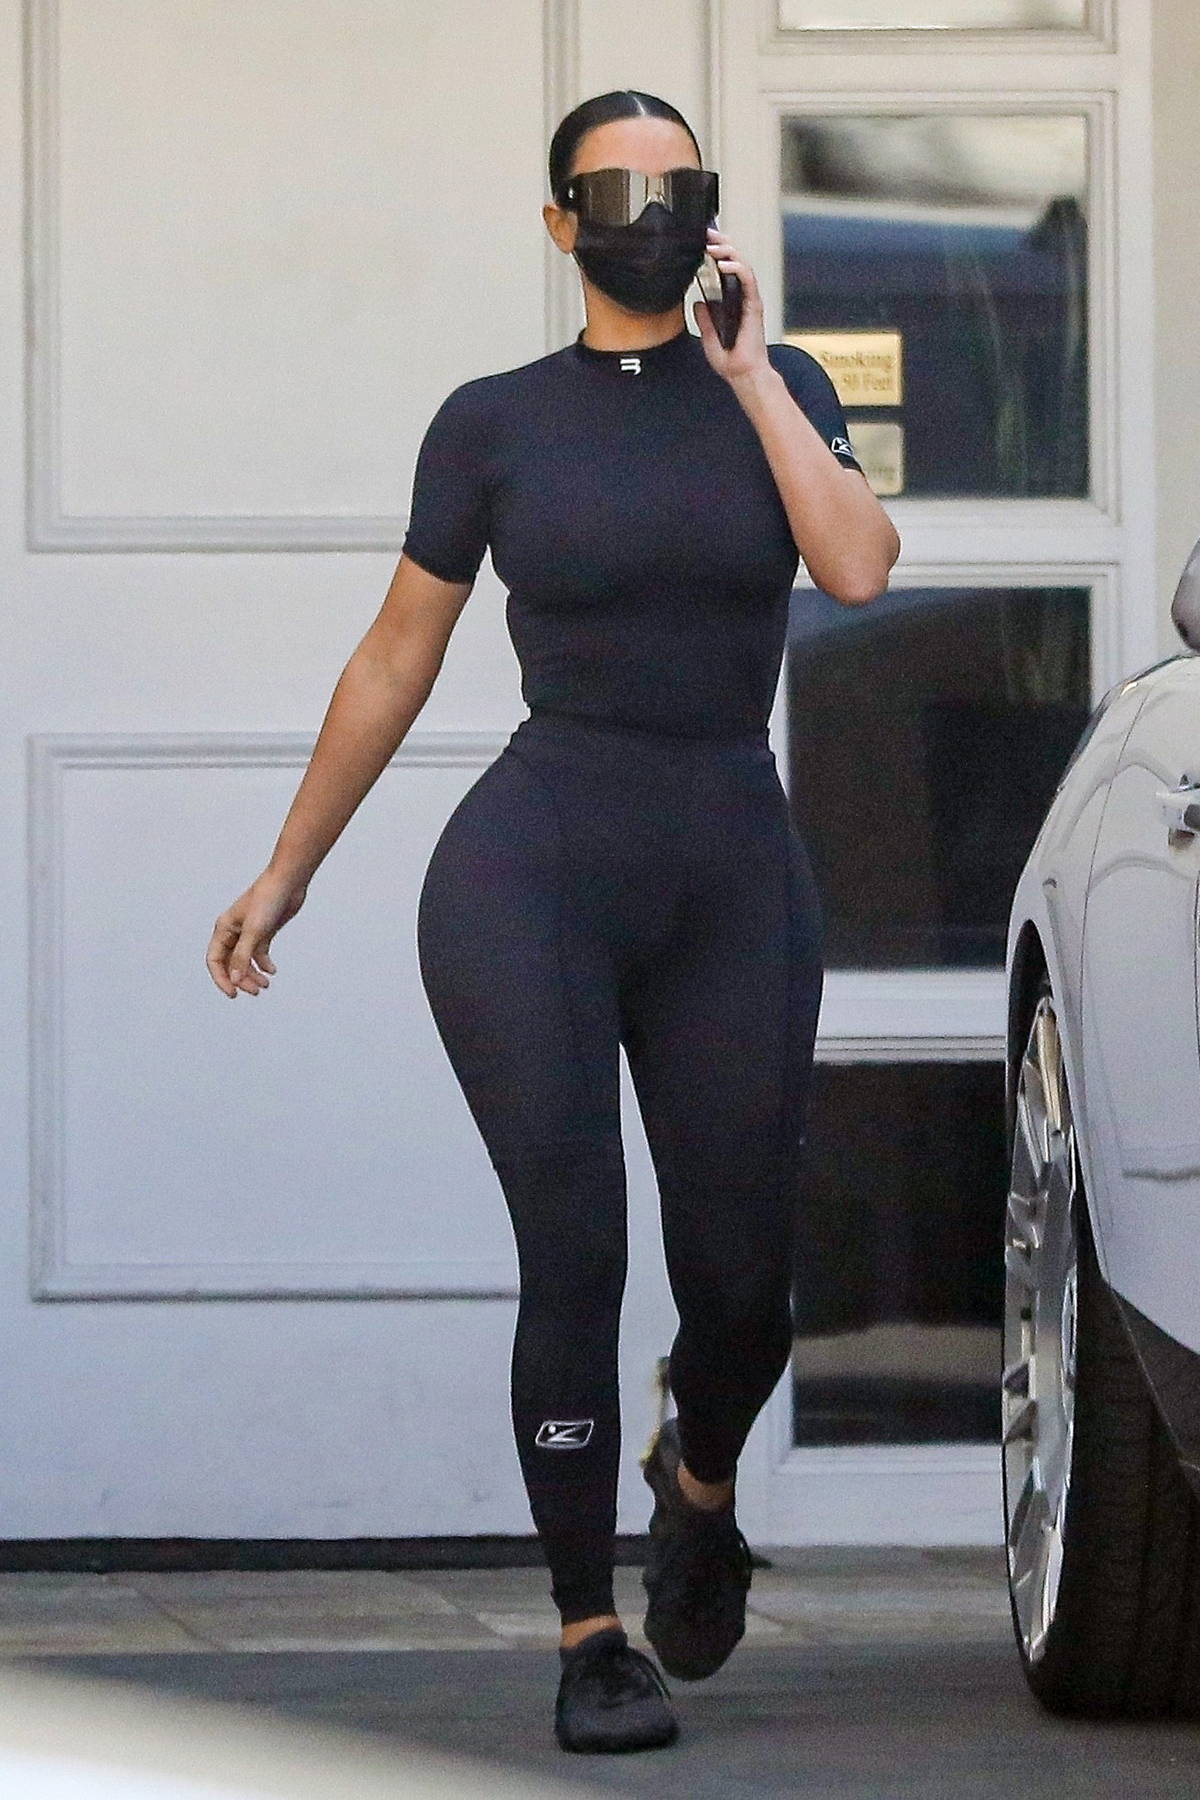 https://www.celebsfirst.com/wp-content/uploads/2021/08/kim-kardashian-flaunts-her-curves-in-black-form-fitting-top-and-leggings-as-she-leaves-epione-in-beverly-hills-california-190821_1.jpg